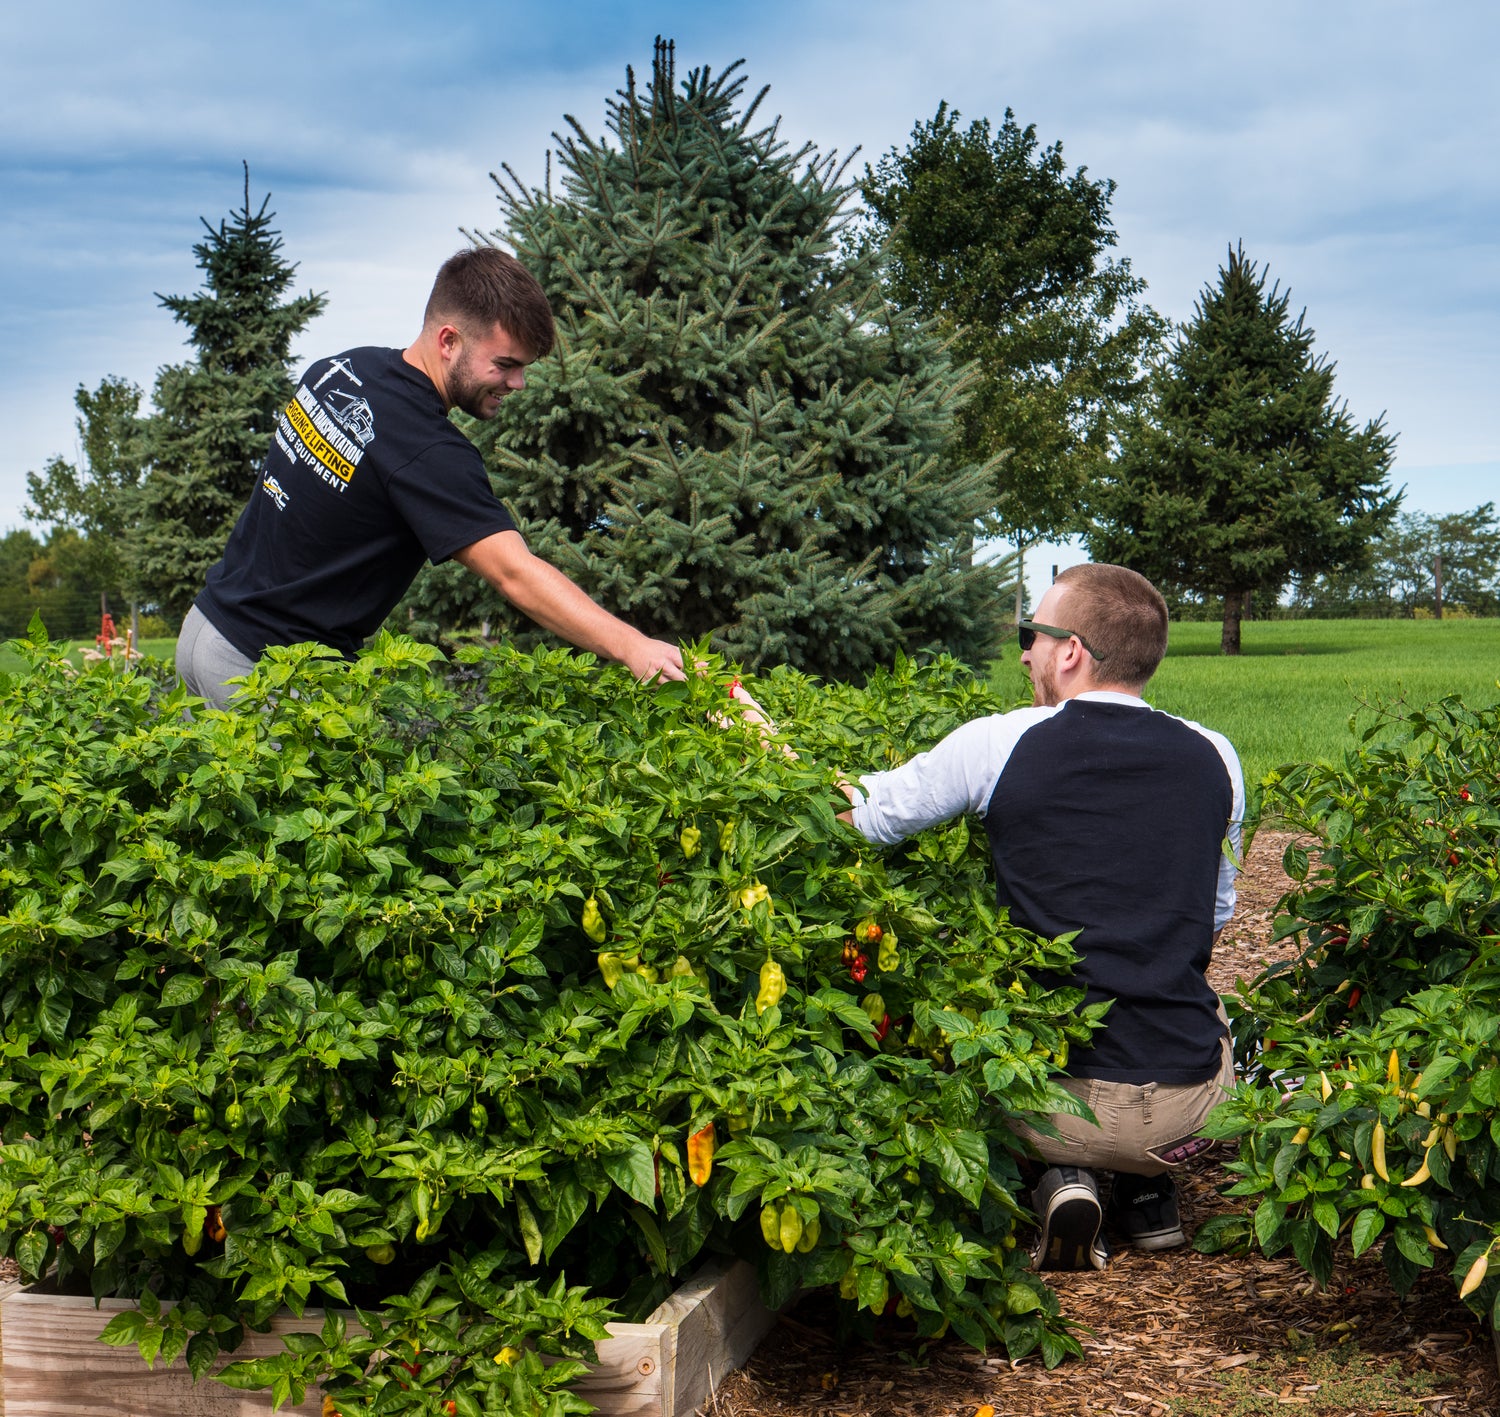 Pepper Joe's pepper growers work diligently on testing super hot pepper plants for quality and reliability